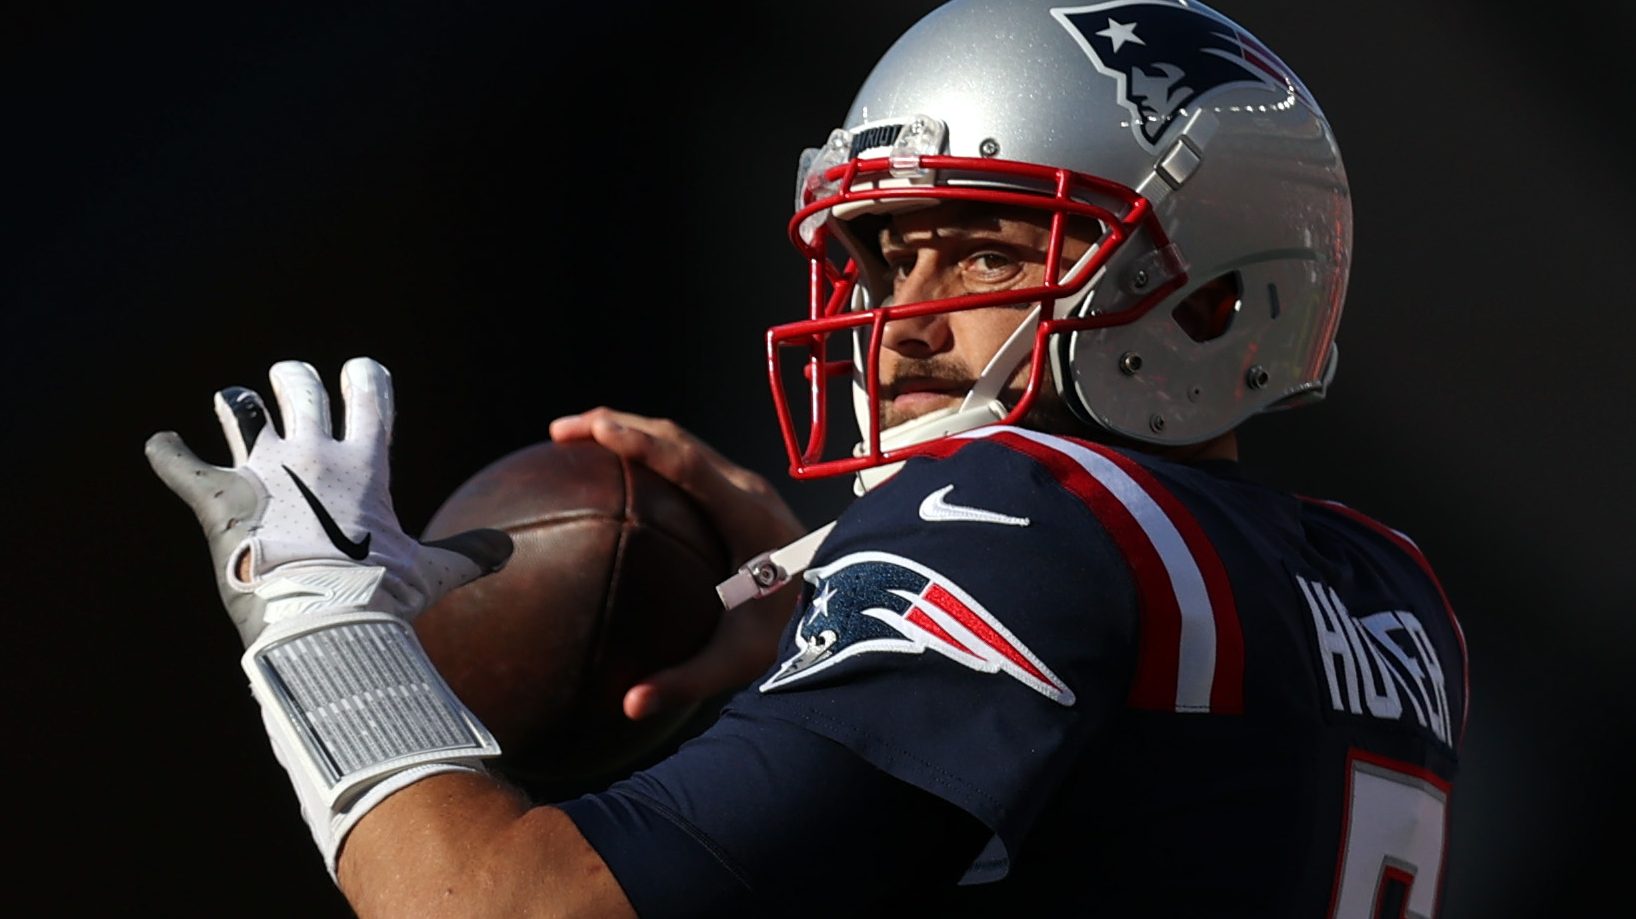 Patriots Signed Brian Hoyer After Jets 'Lowball' Offer